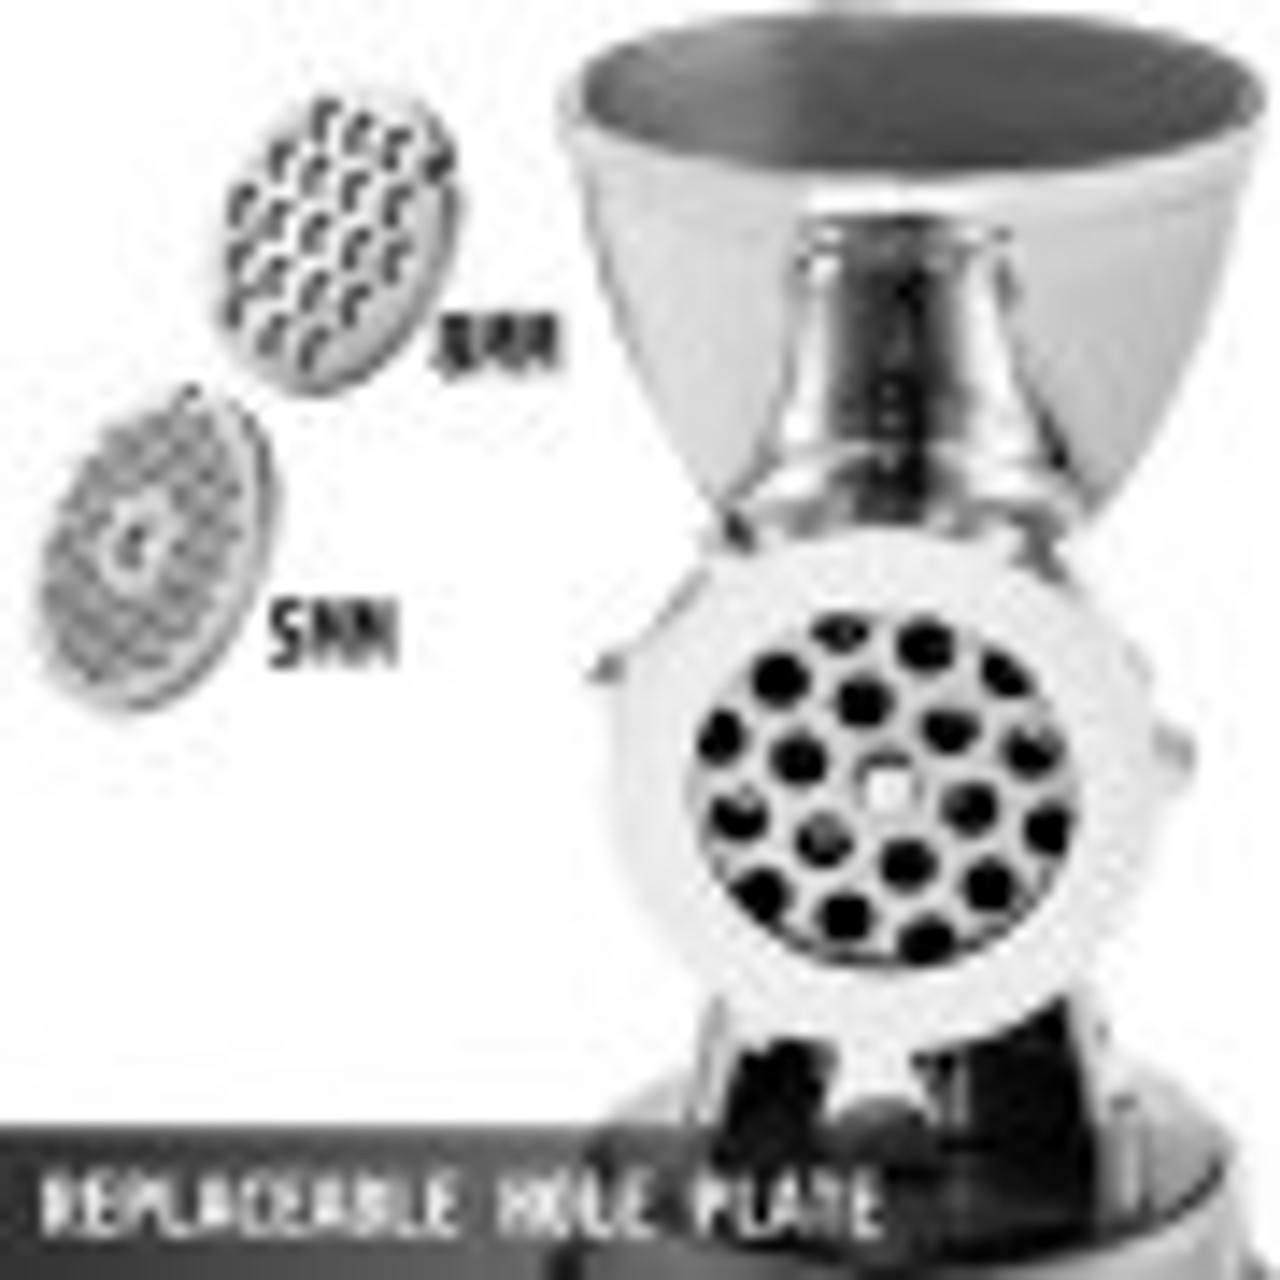 Meat Grinder Manual 304 Stainless Steel Hand Suction Cup Base & Clamp with Filling Nozzle for Vegetables Grinding & Sausage Stuffing, 6.7x6x9.6inch, Sliver